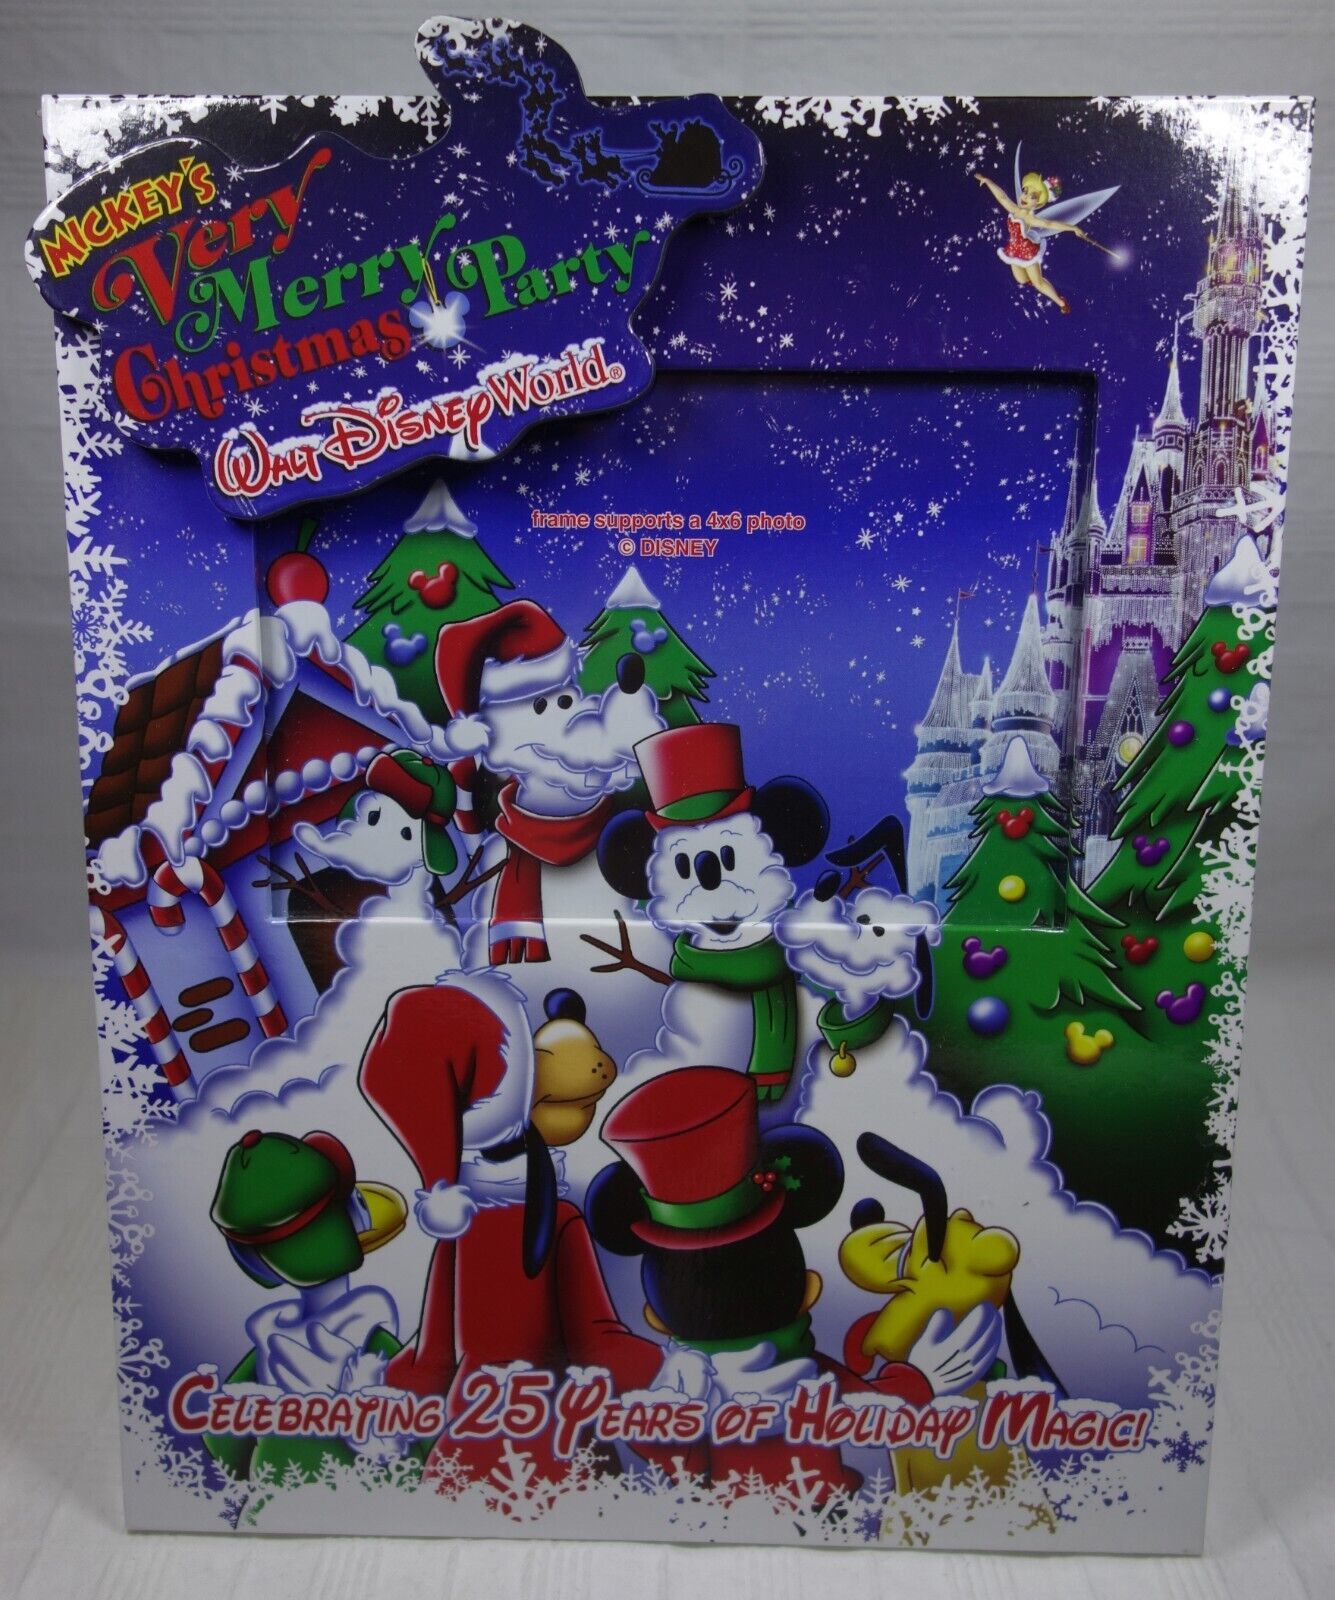 Primary image for Mickey's Very Merry Christmas Party Picture Frame - Celebrating 25 Years WDW